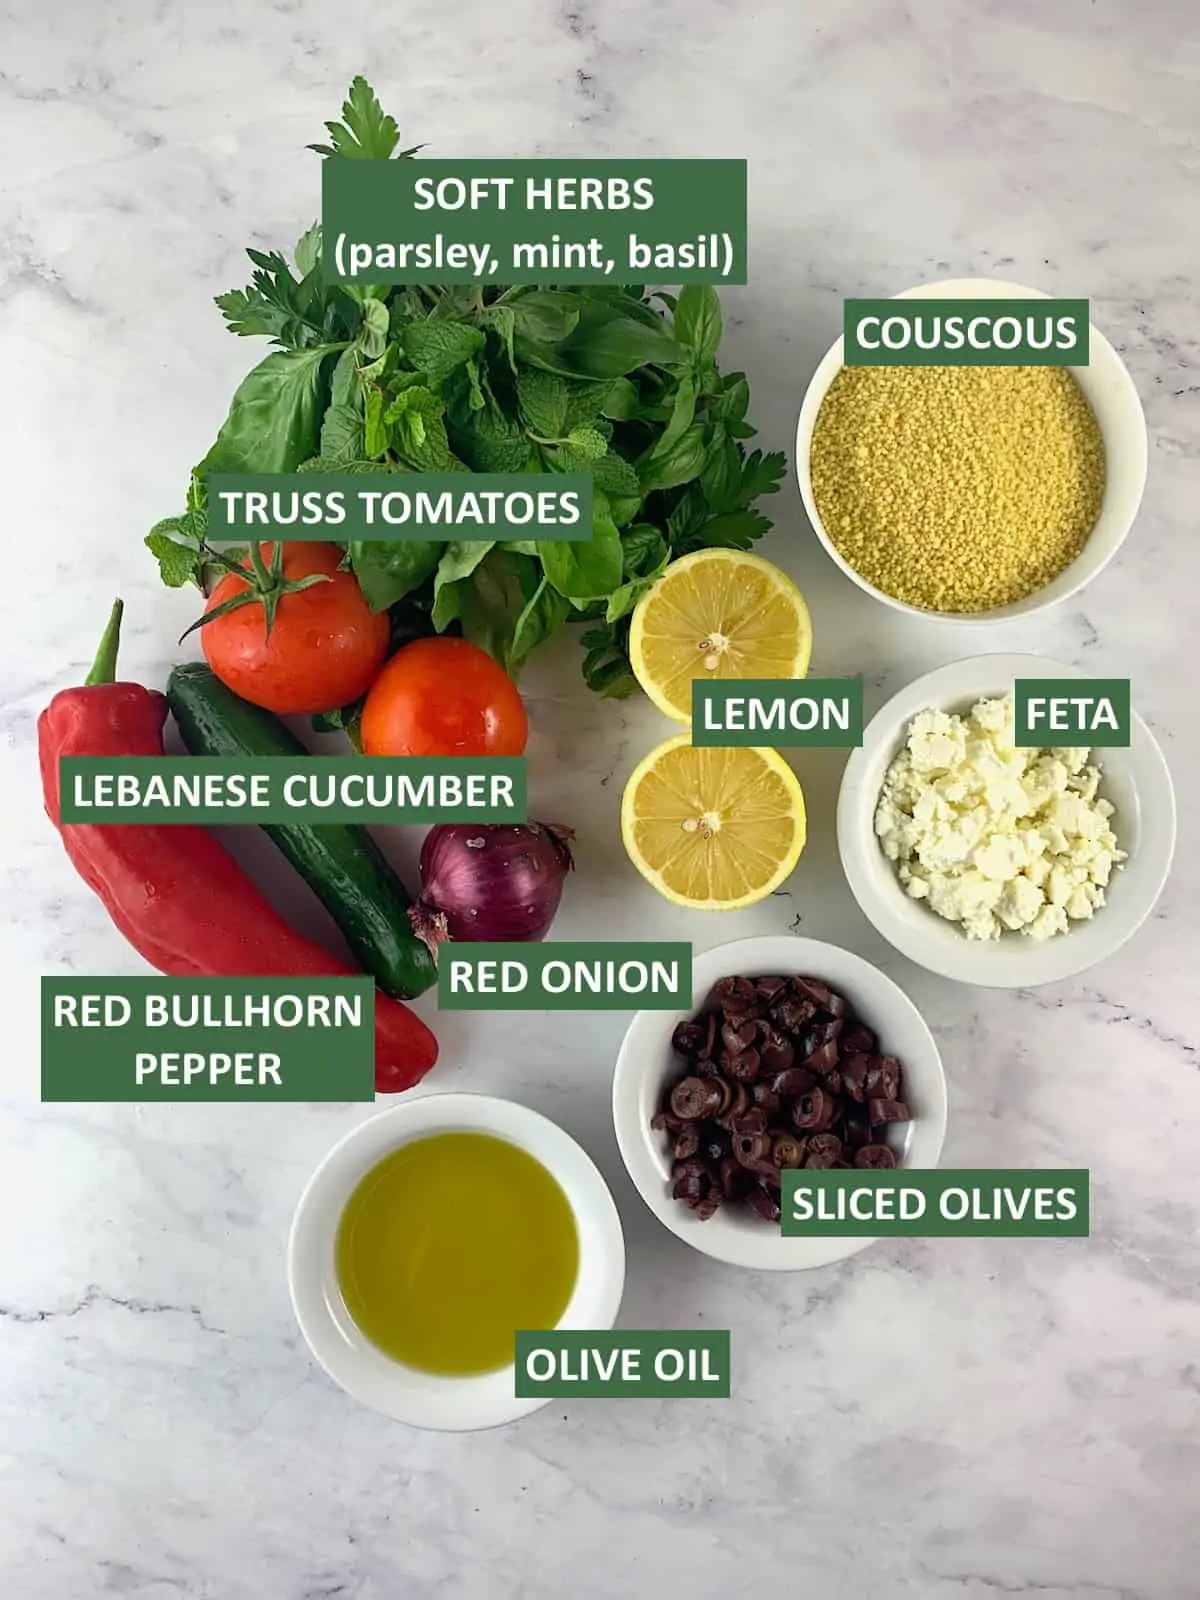 LABELLED INGREDIENTS FOR MEDITRRANEAN COUSCOUS SALAD